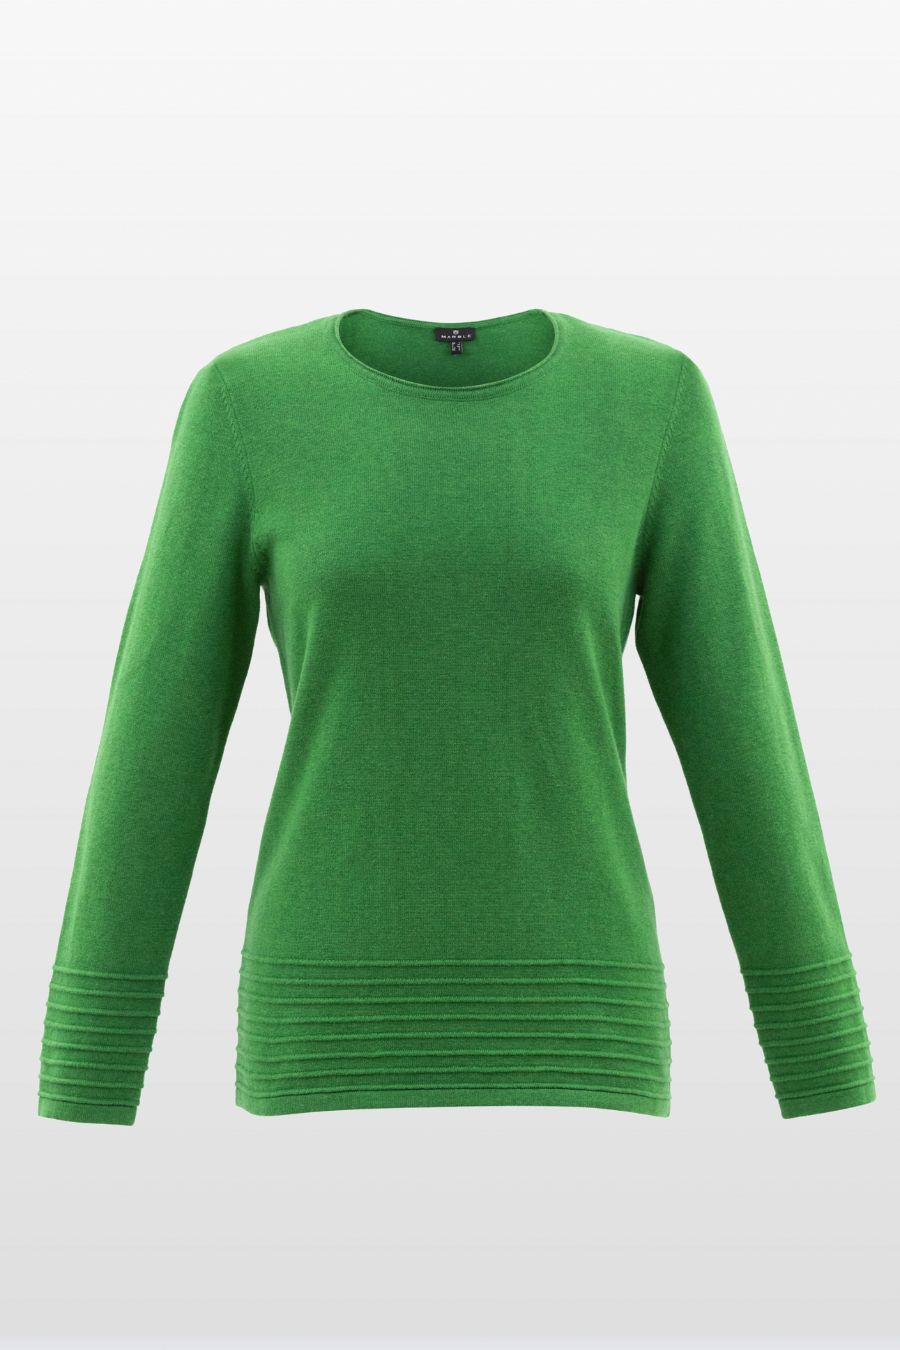 Raised Knit Detail Round Neck Sweater ONLINE ONLY